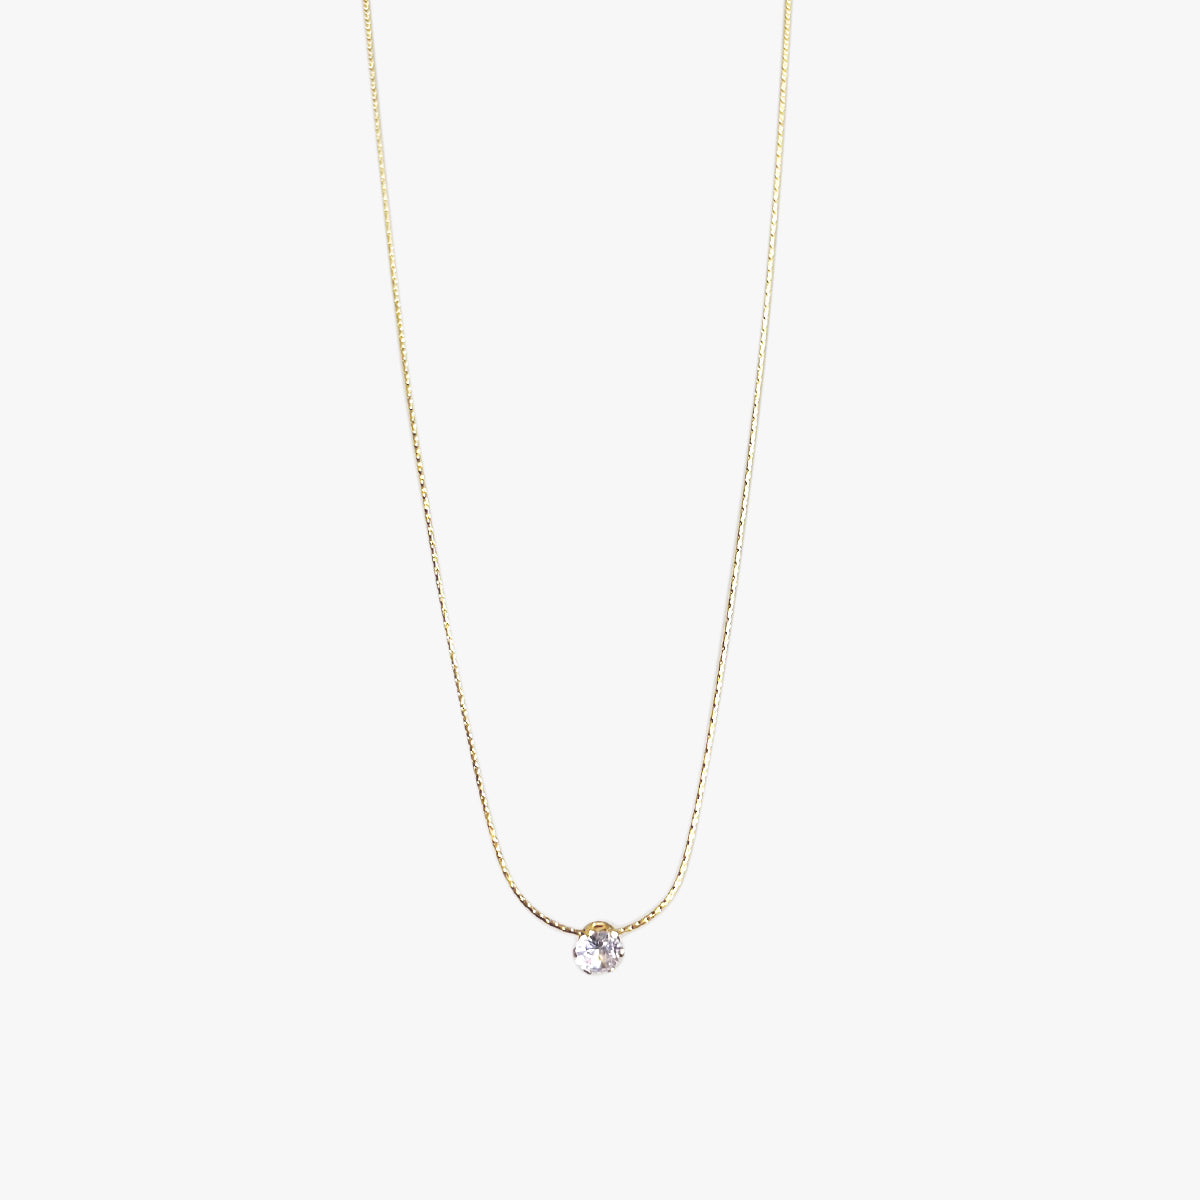 The Barely There Solitaire Necklace